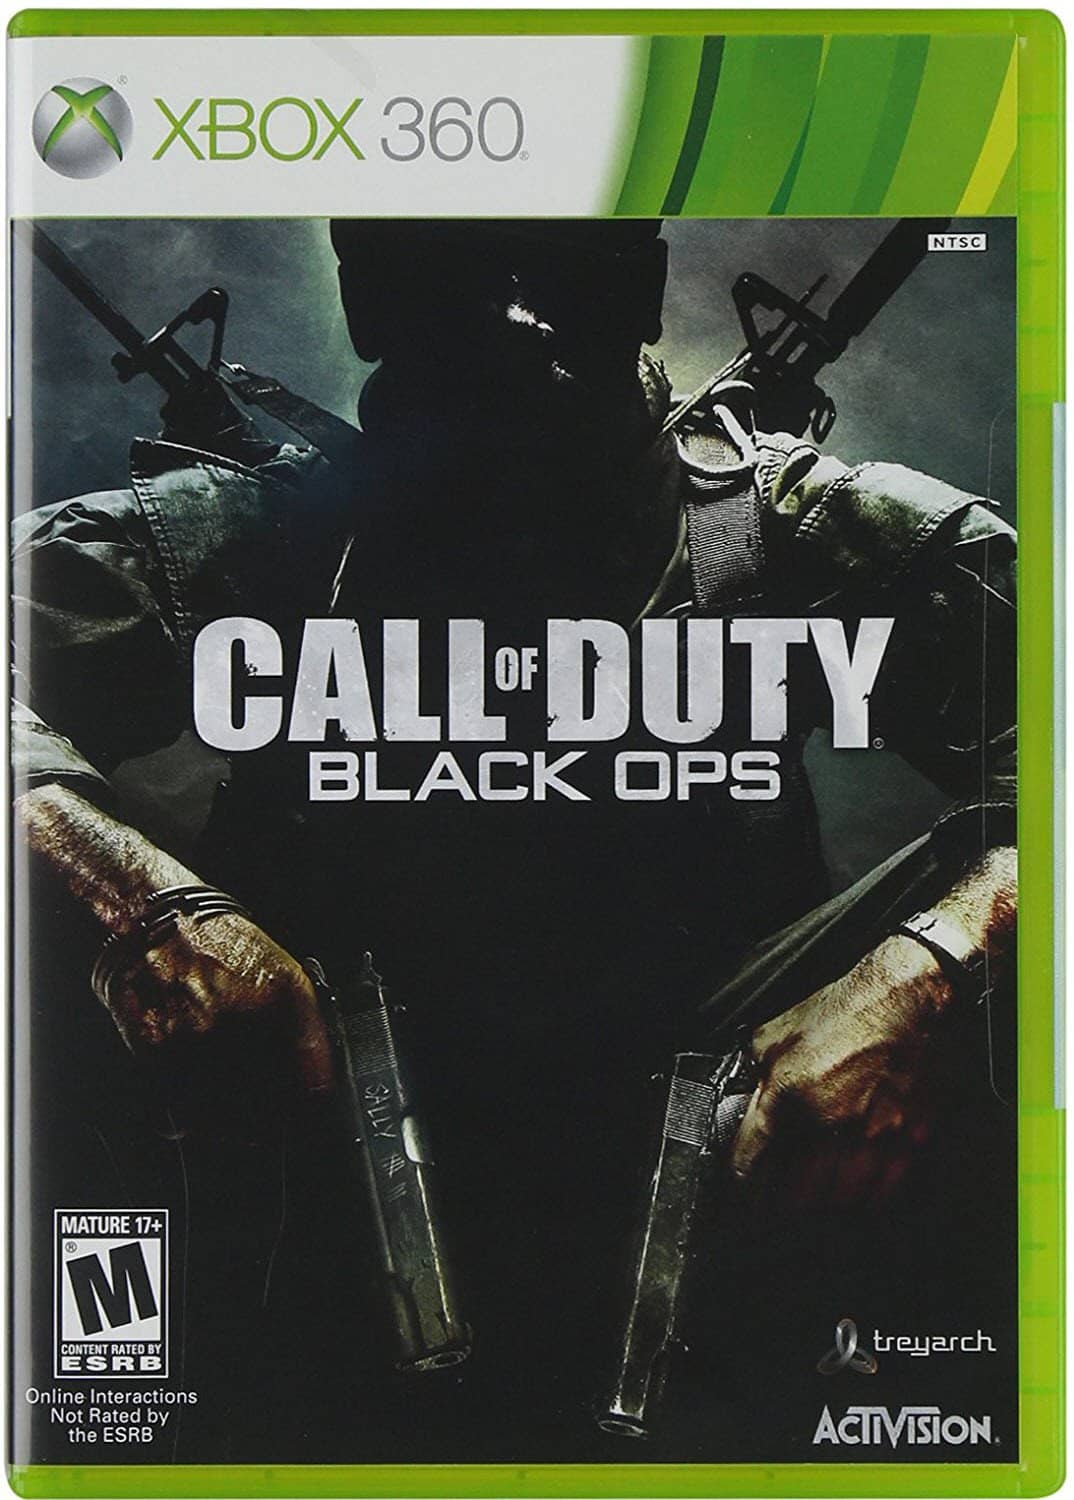 call of duty black ops xbox 360